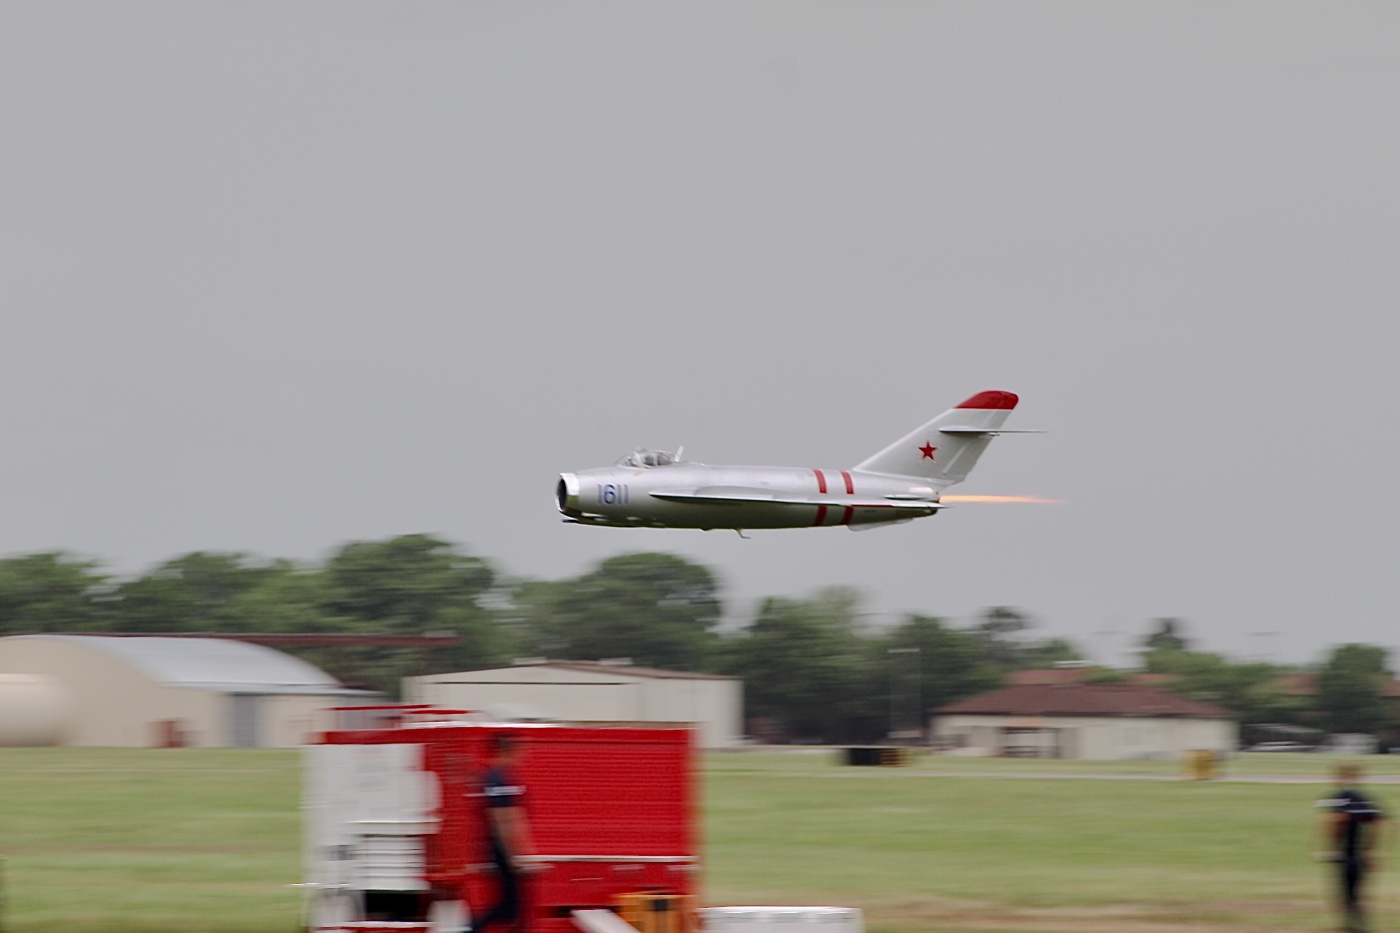 Randy W. Balls MiG-17 during AirPower over Hampton Roads